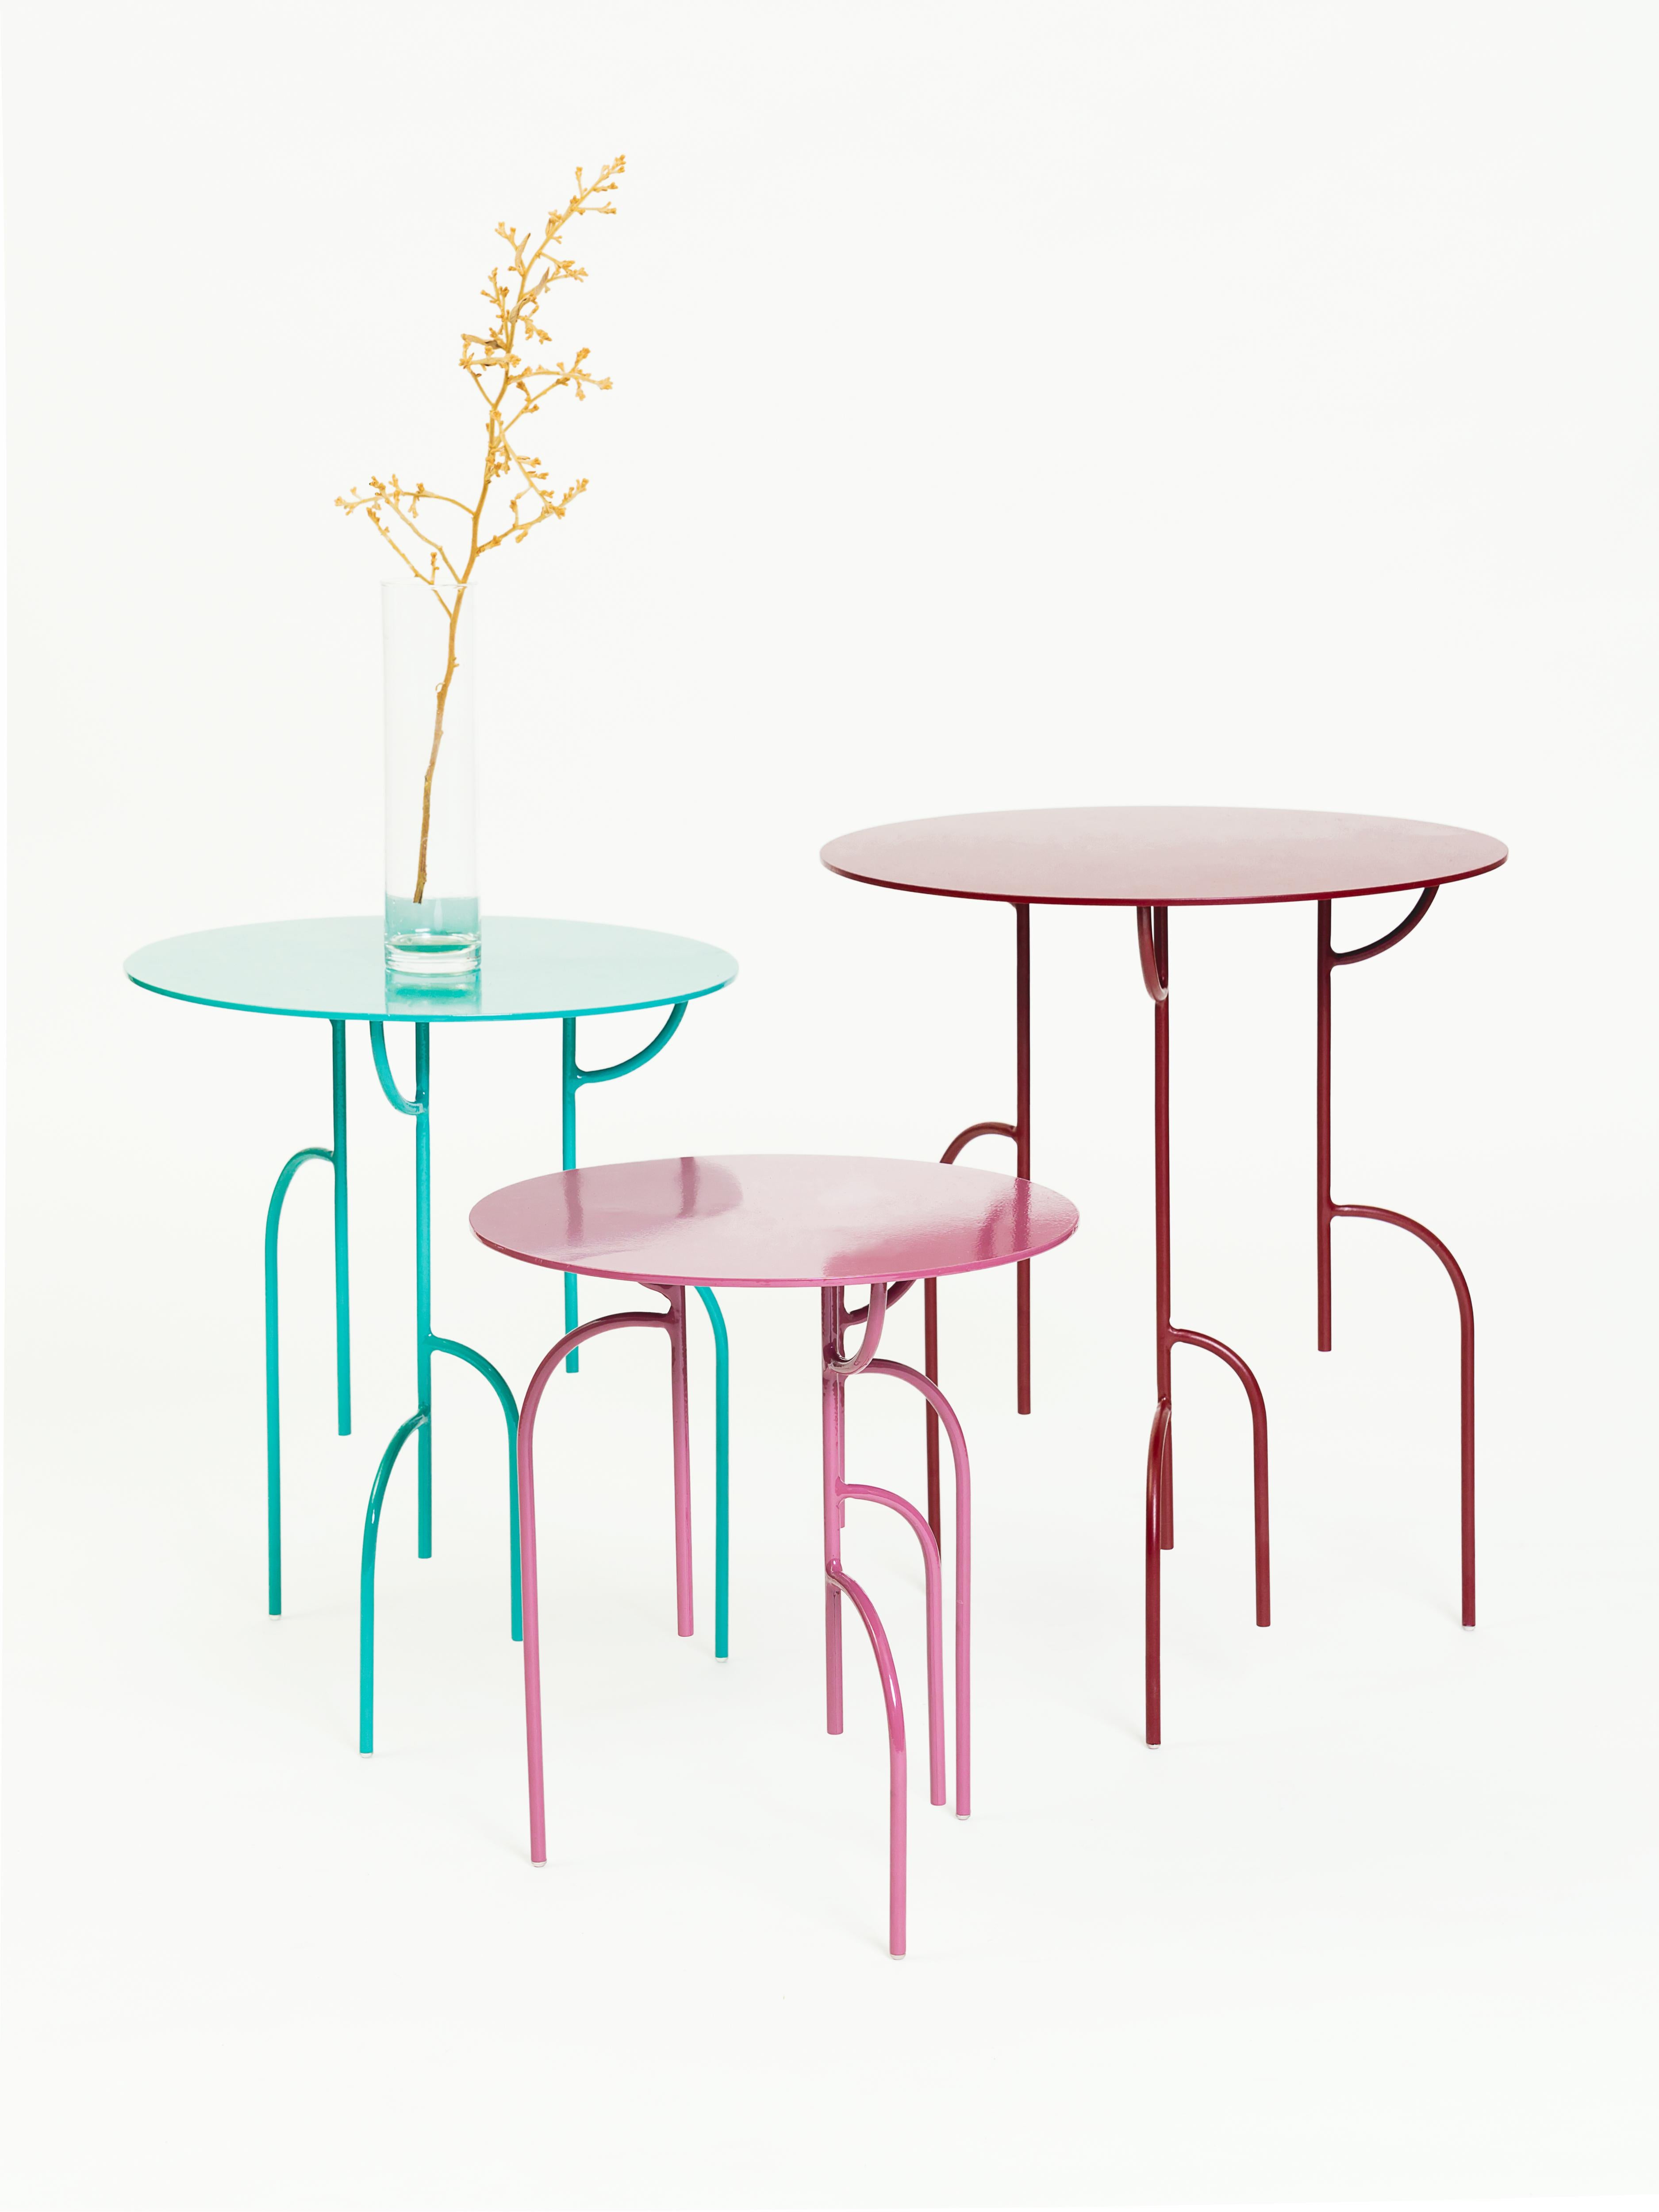 The Lagoas tables and lamp are inspired by the nature, it is an allusion to the mangrove trees and the way it deeps into the water.

The legs design plays with the senses of the observer by distorting the perspective and sense of distance. It is